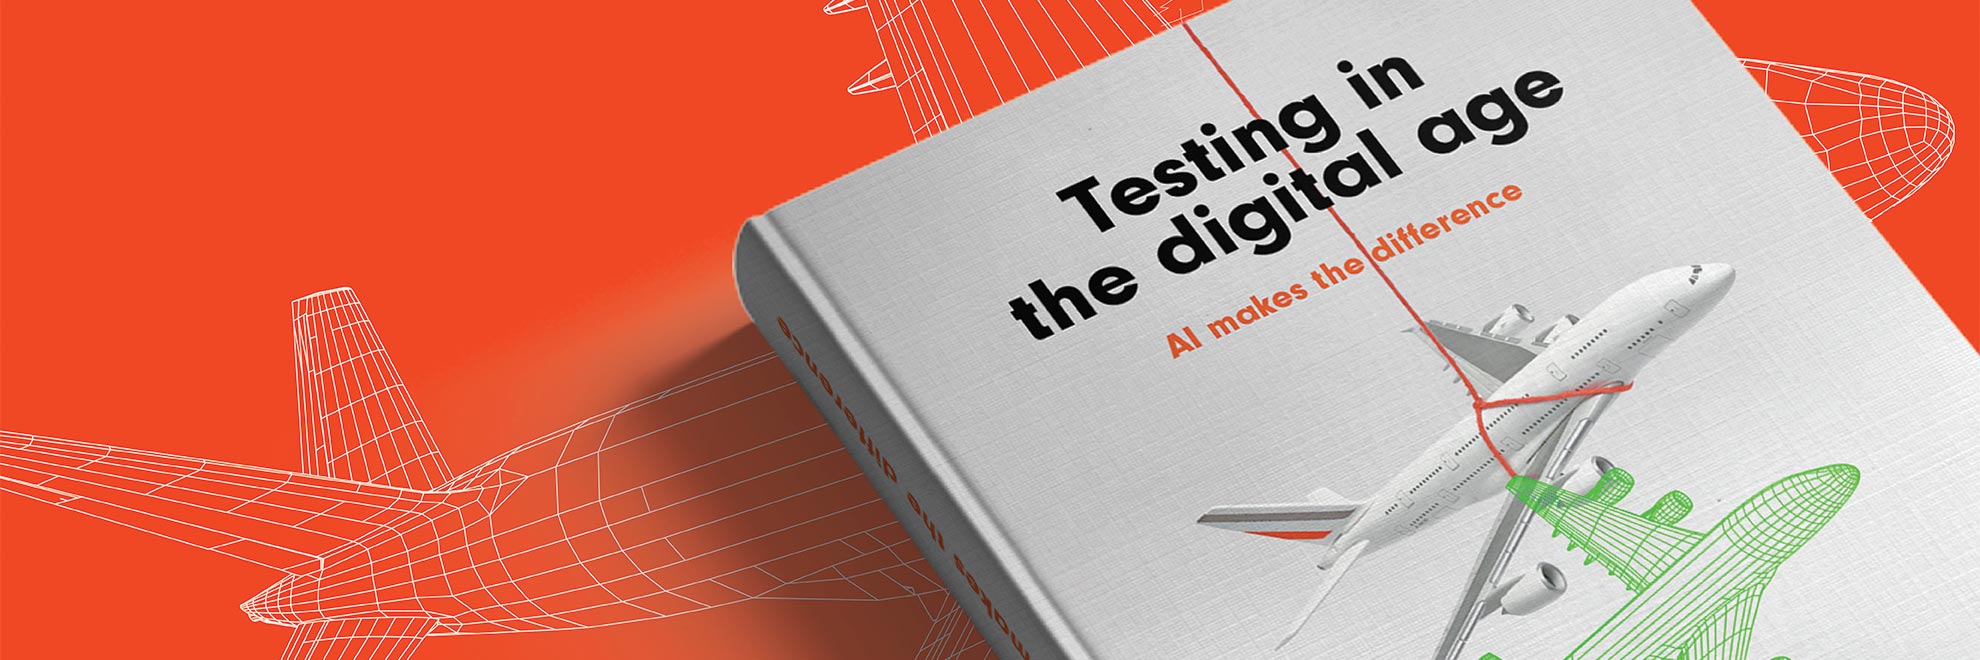 Testing in the Digital Age - AI makes a difference